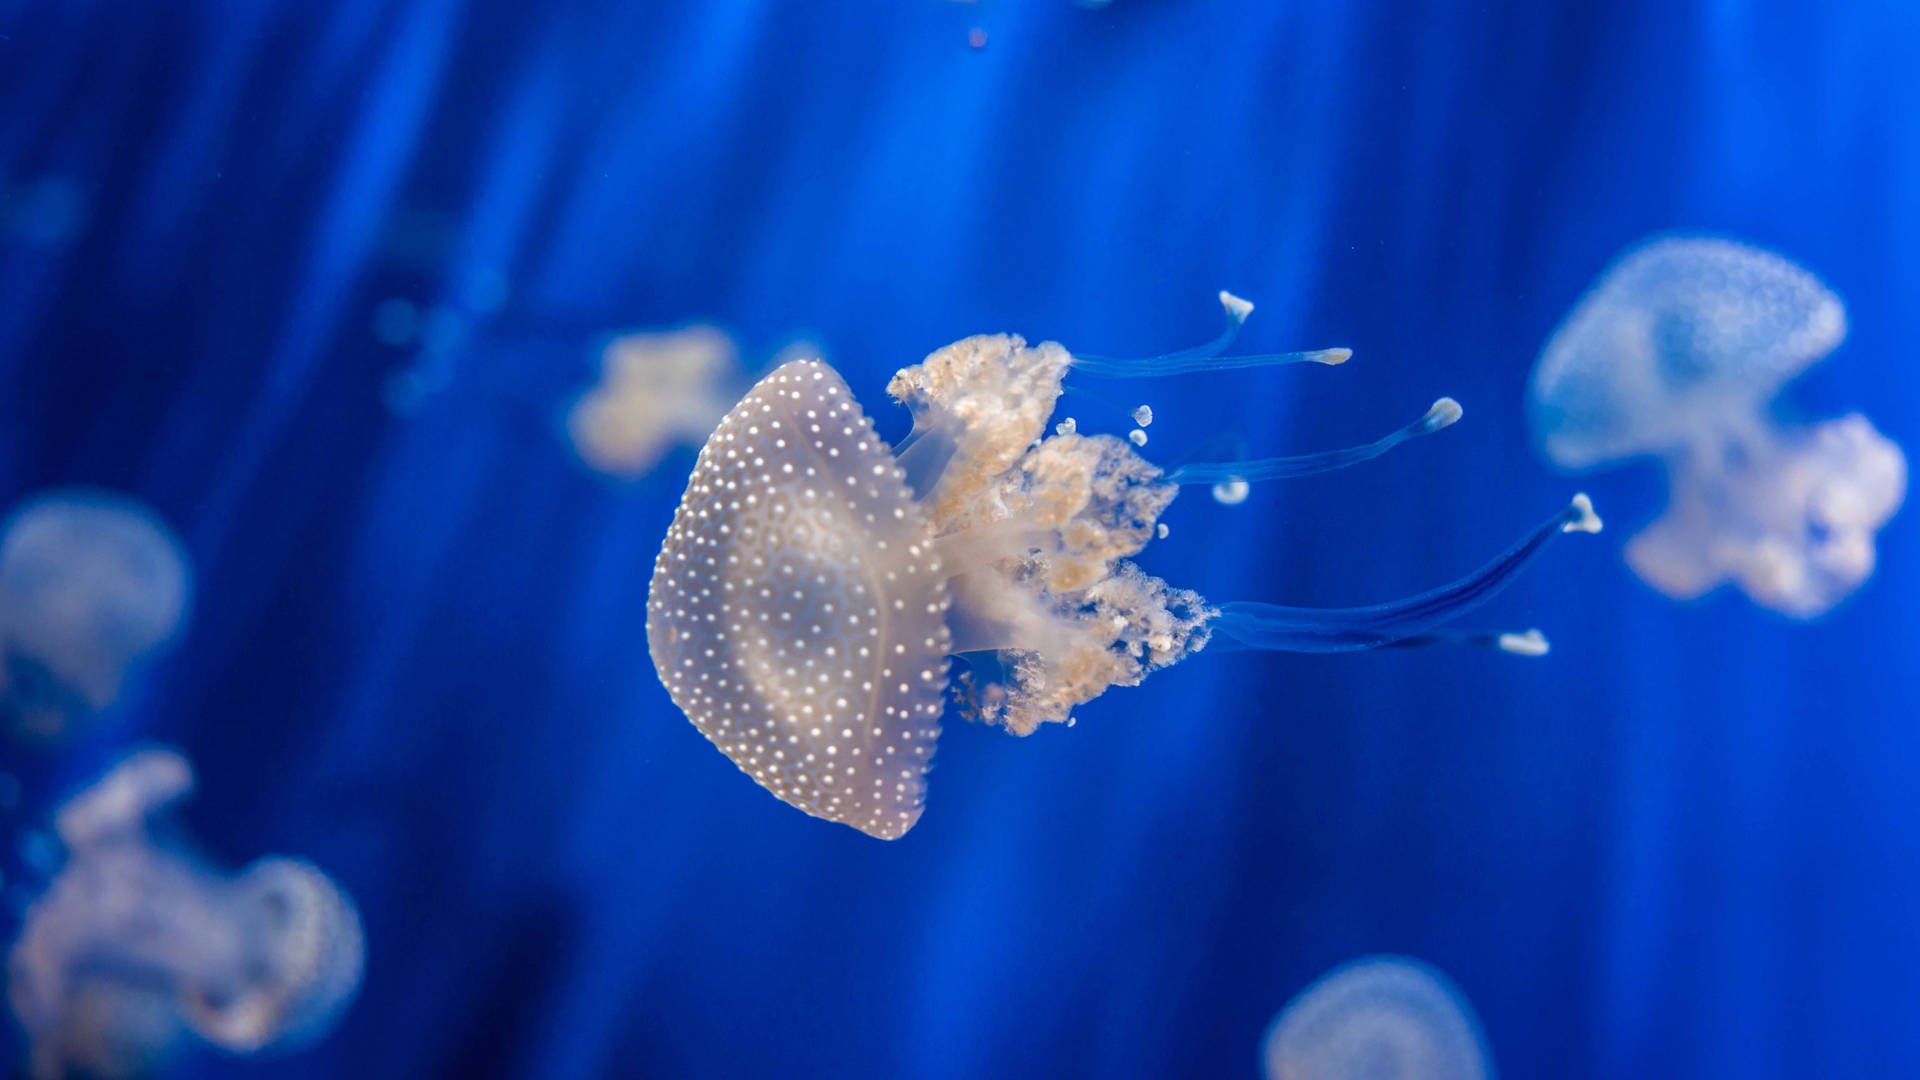 5k Hd White-spotted Jellyfish